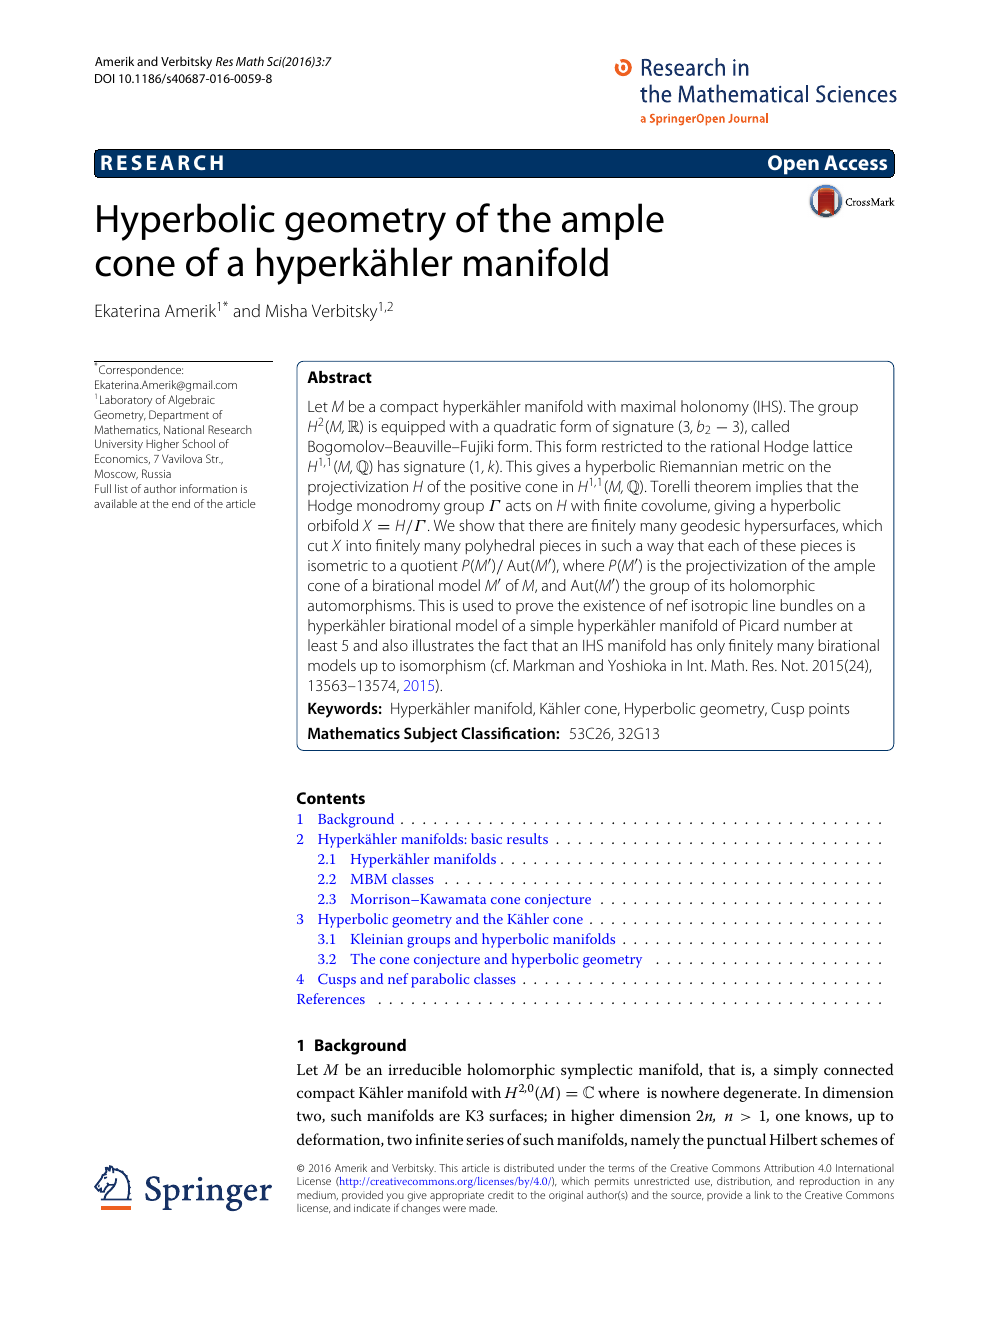 Hyperbolic Geometry Of The Ample Cone Of A Hyperkahler Manifold Topic Of Research Paper In Mathematics Download Scholarly Article Pdf And Read For Free On Cyberleninka Open Science Hub